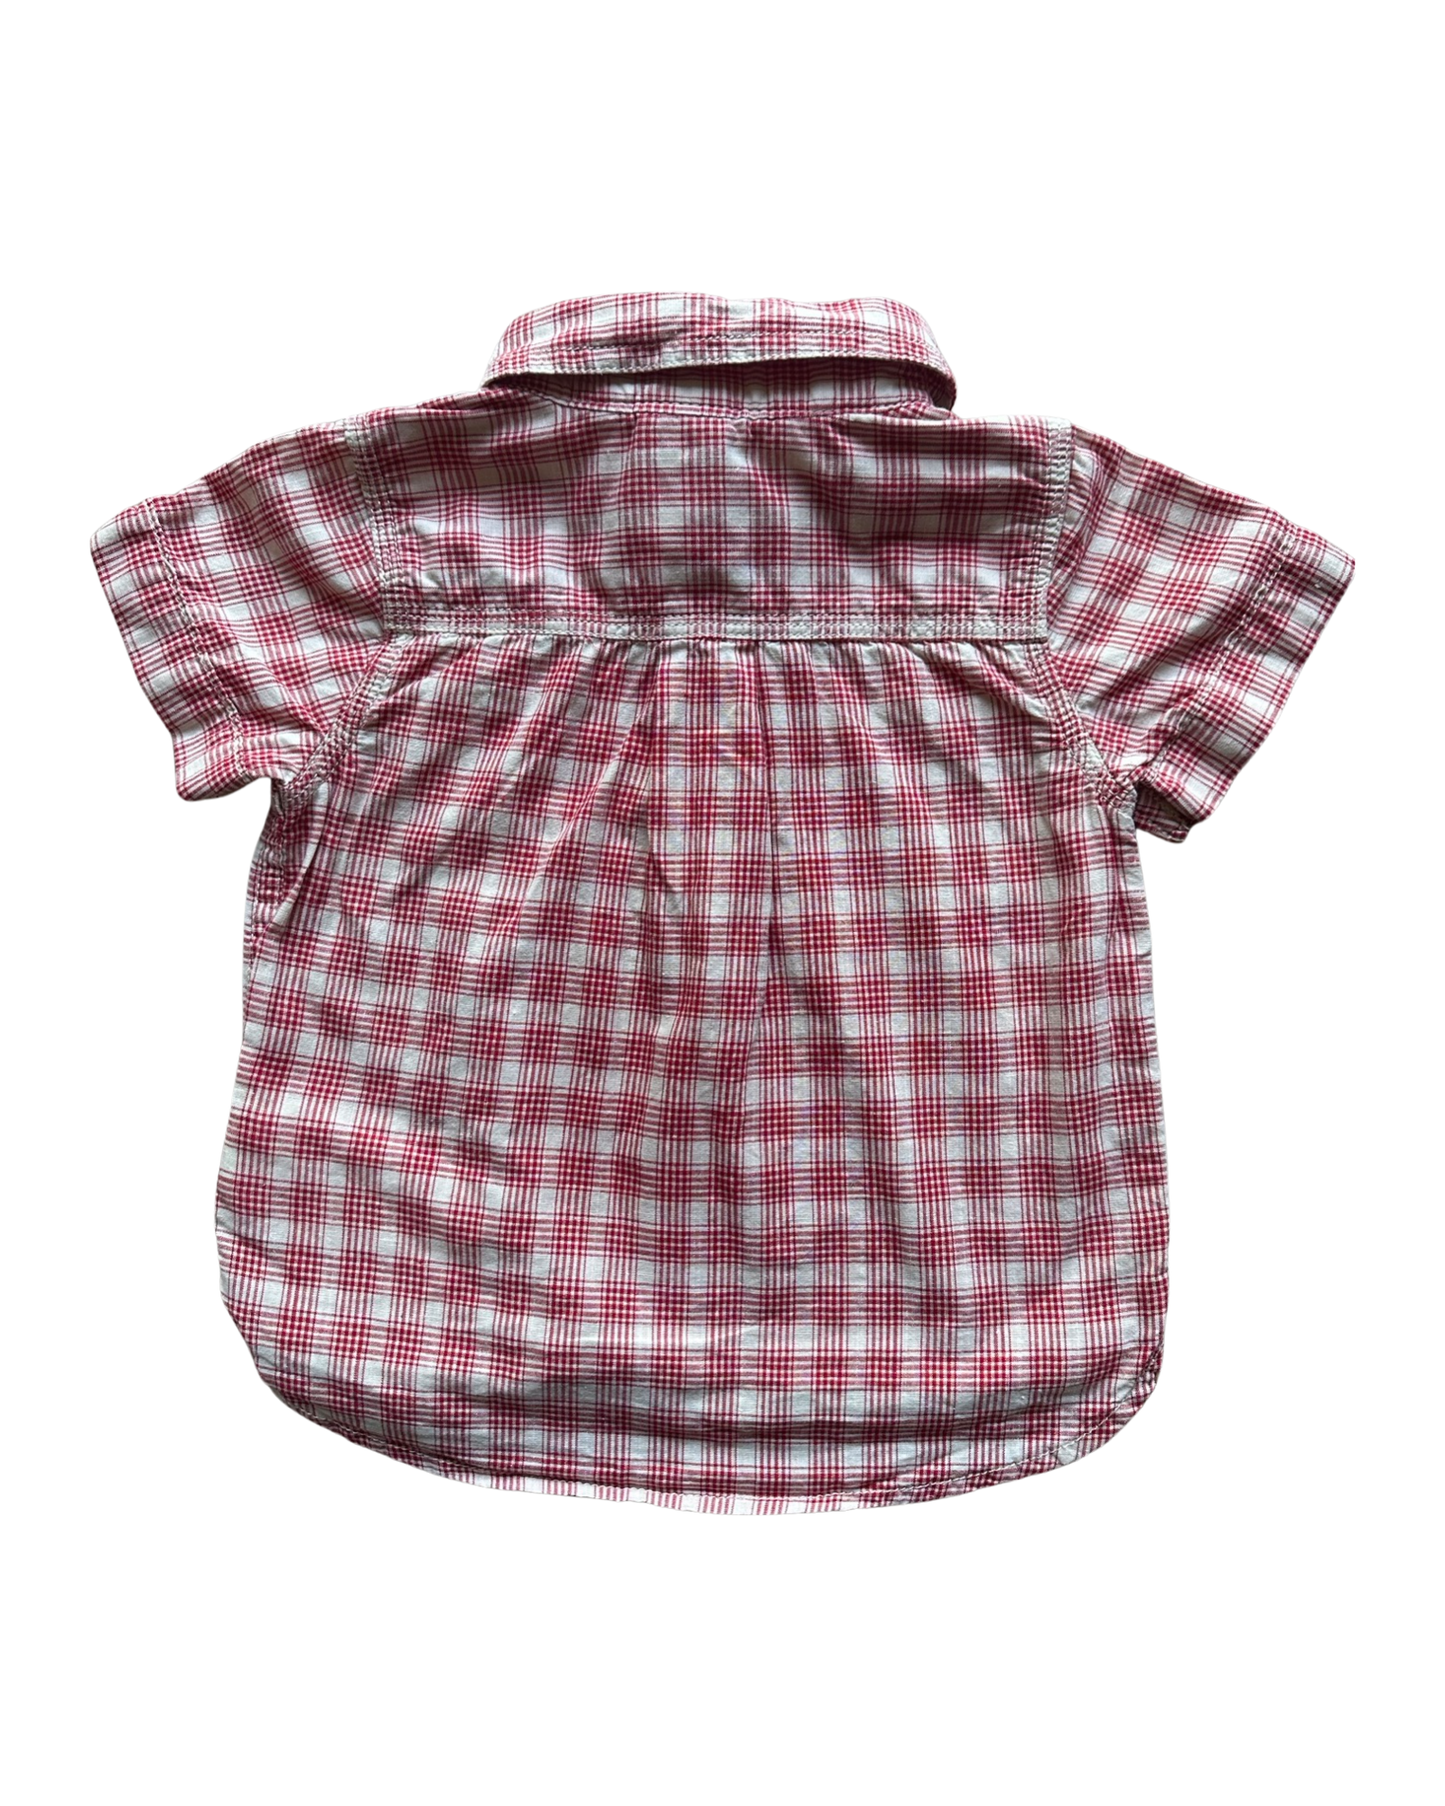 Baby Gap checked cotton shirt (size 12-18mths)